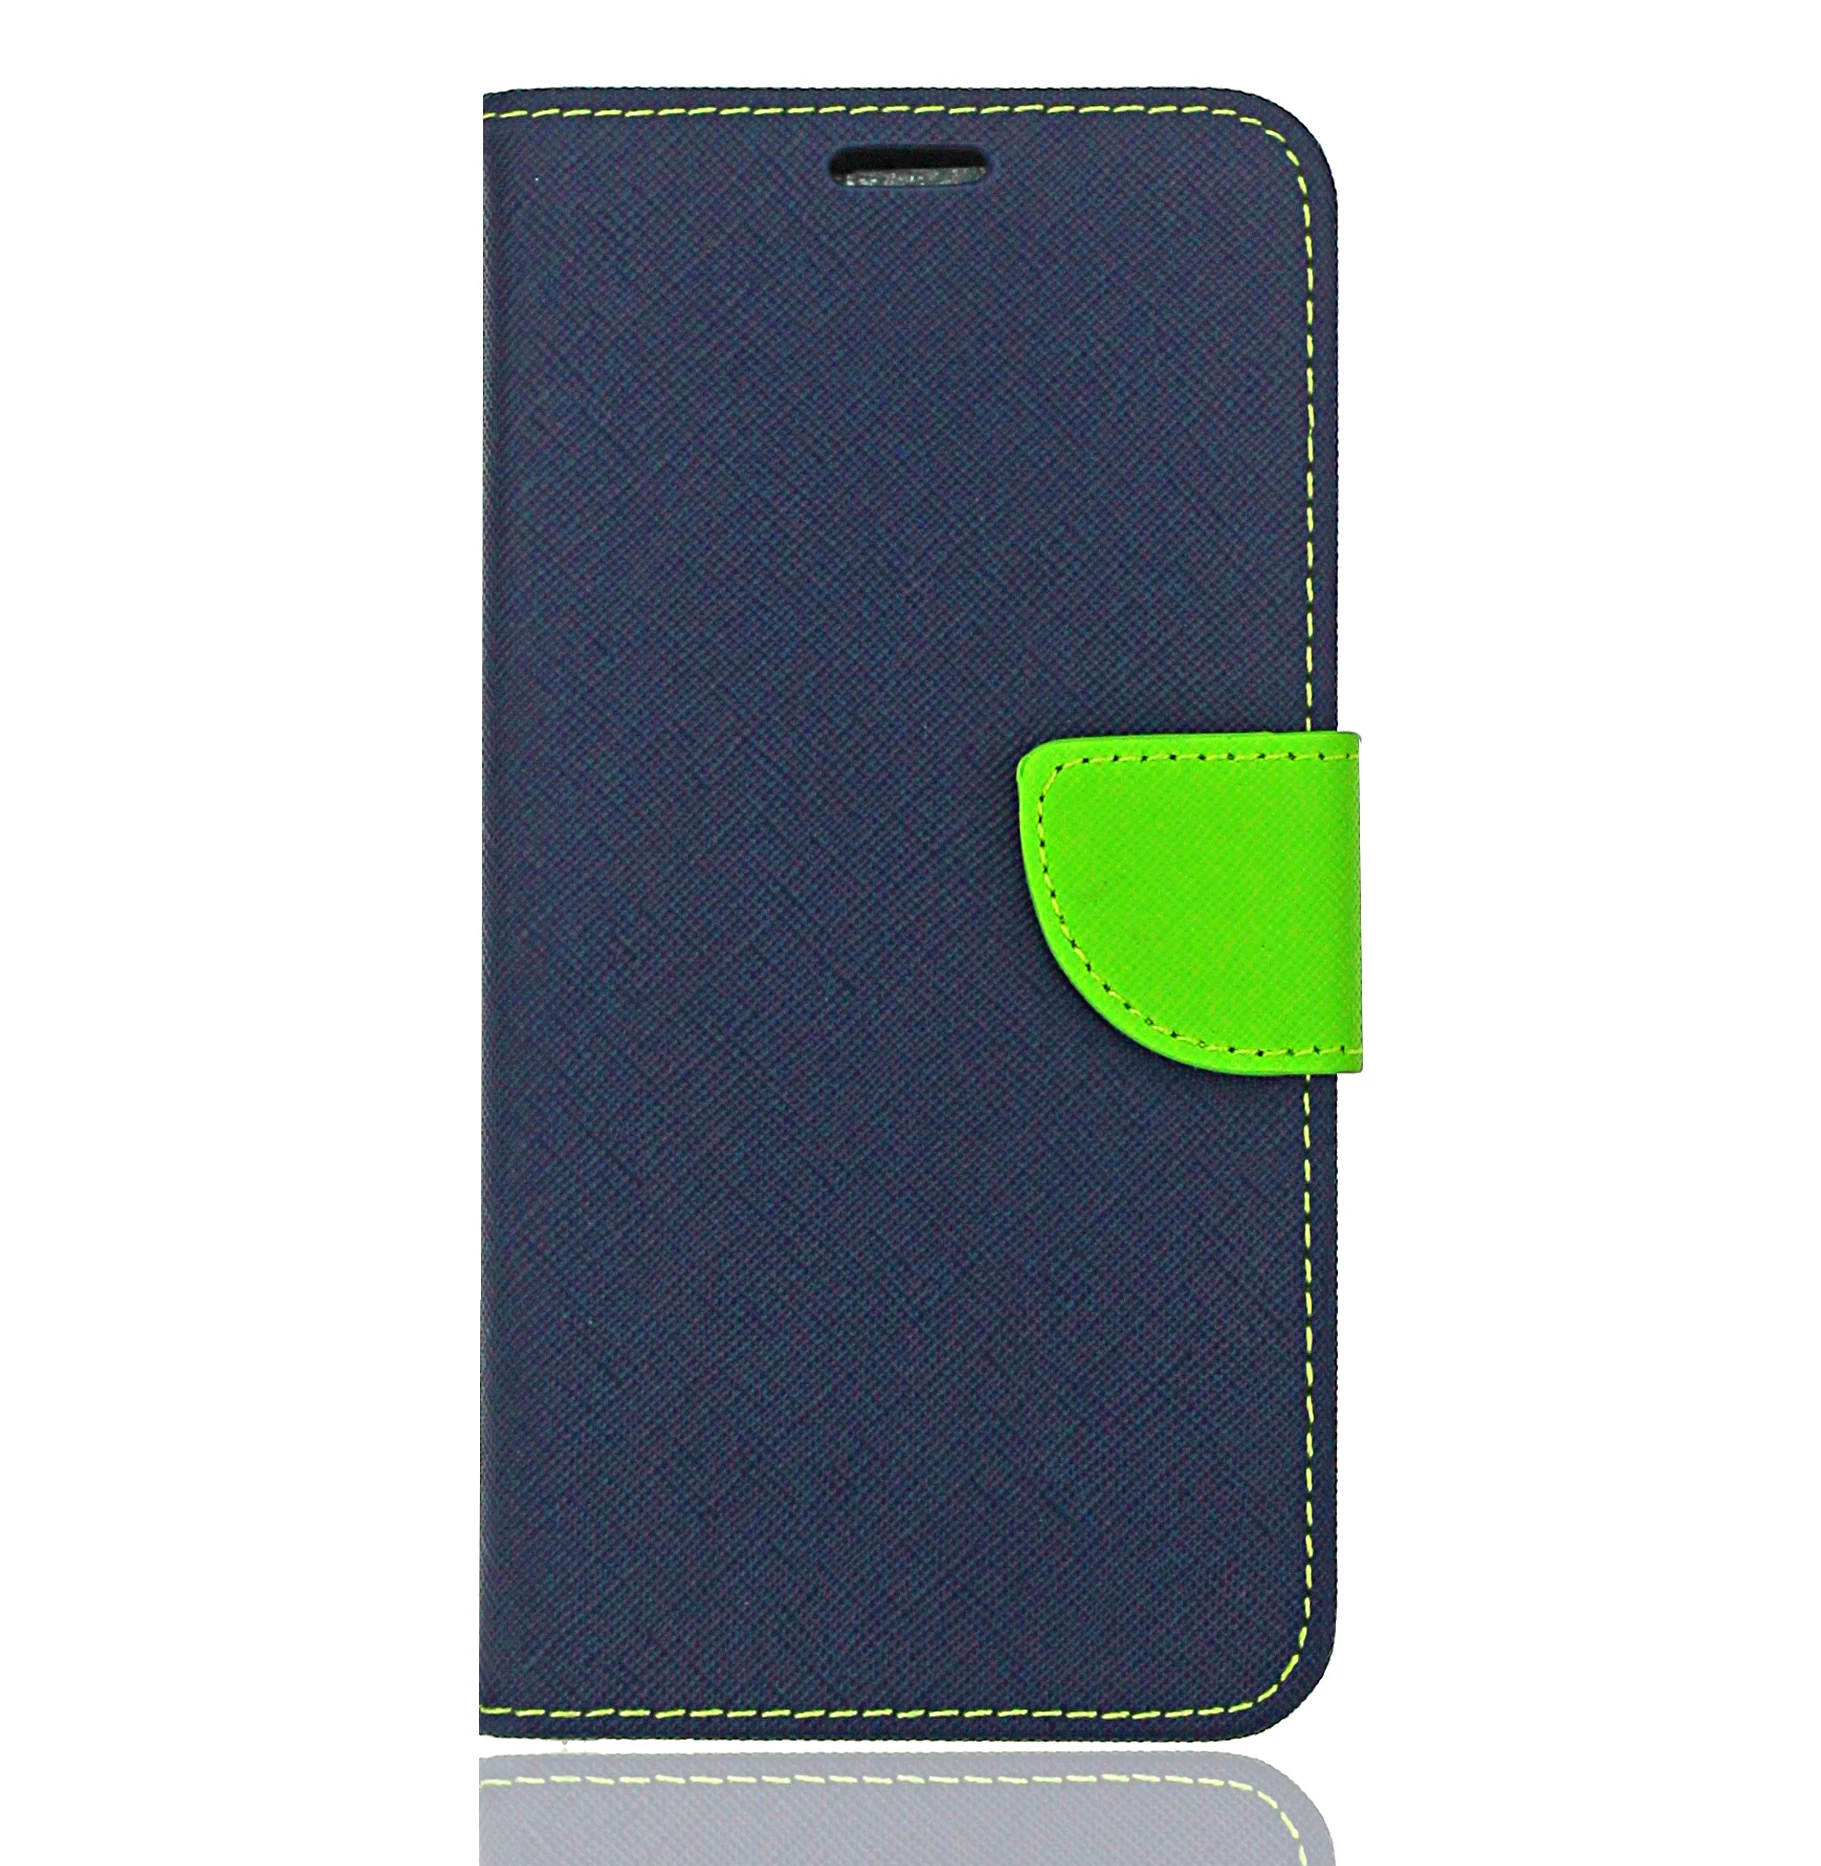 Wallet Leather Case Card Pocket Cover For Meizu 15 16S 16X M15 M2 M3 M5 M5C M5S M6 M6S M6T A5 Mini Lite Note 2 3 6 8 9 X8 C9 best meizu phone cases